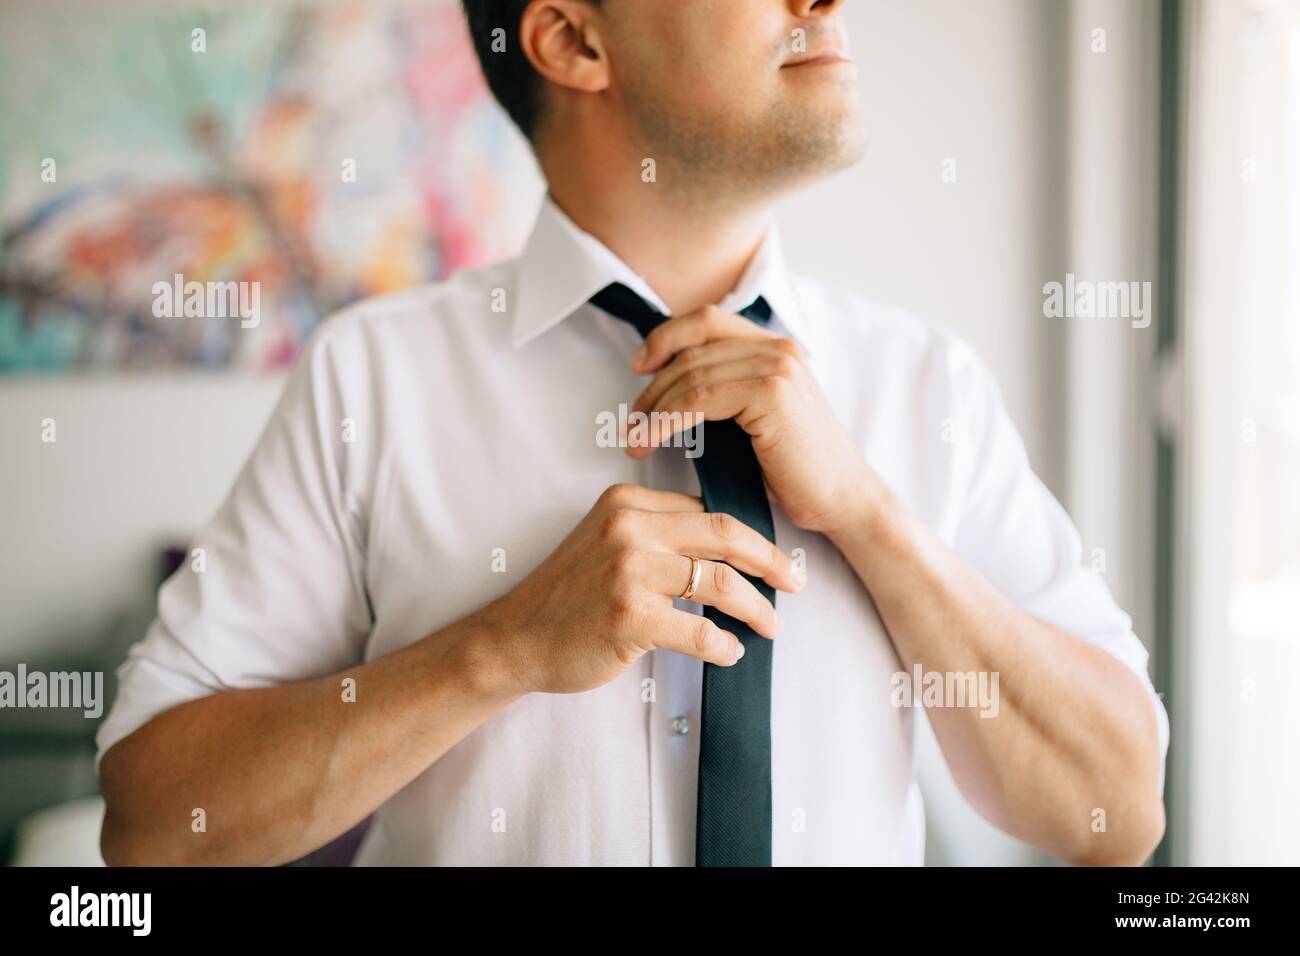 A man puts on and ties a tie while preparing for a wedding ceremony Stock Photo